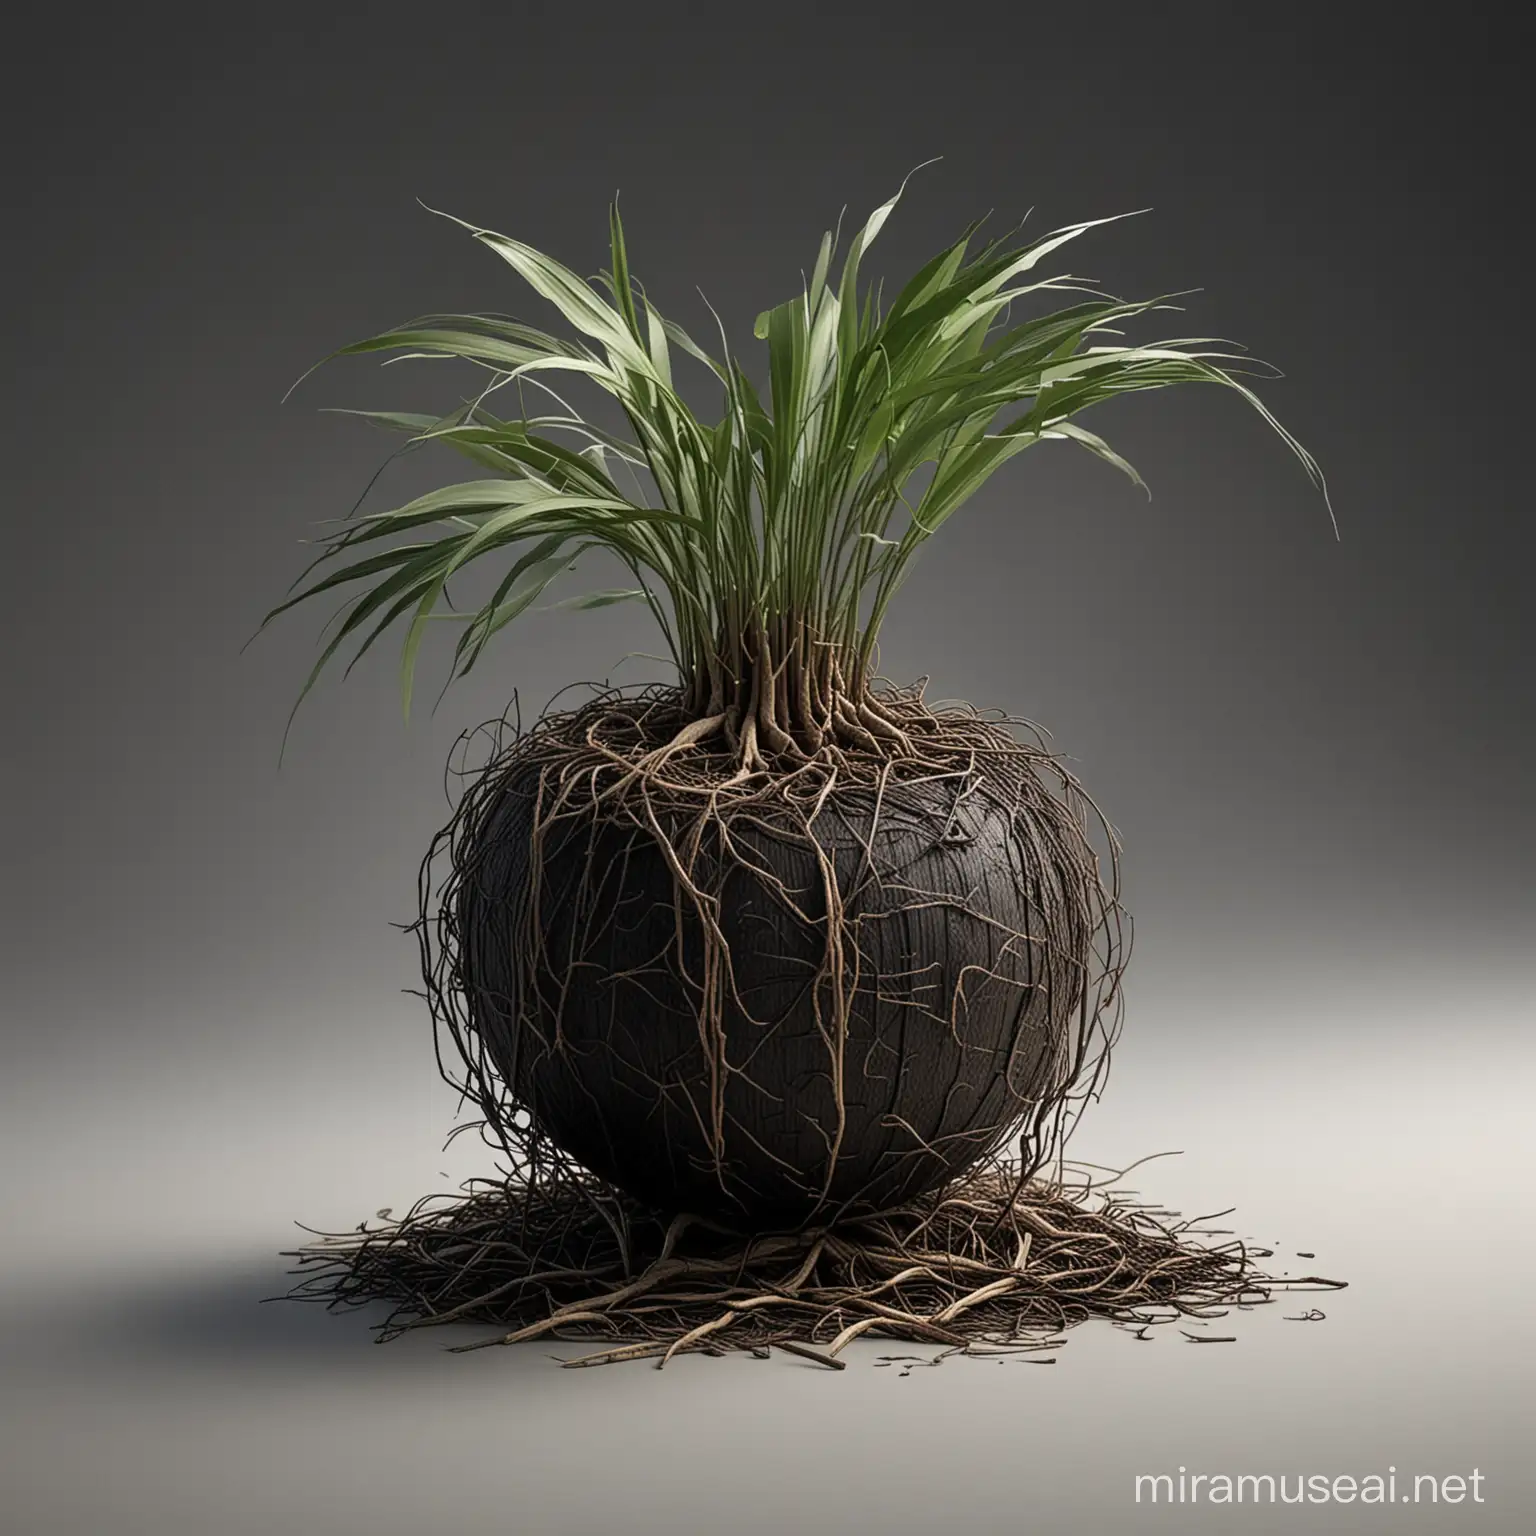 create a realistic image black vetiver plant with its roots in a ball with a few pieces of agarwood in the foreground



